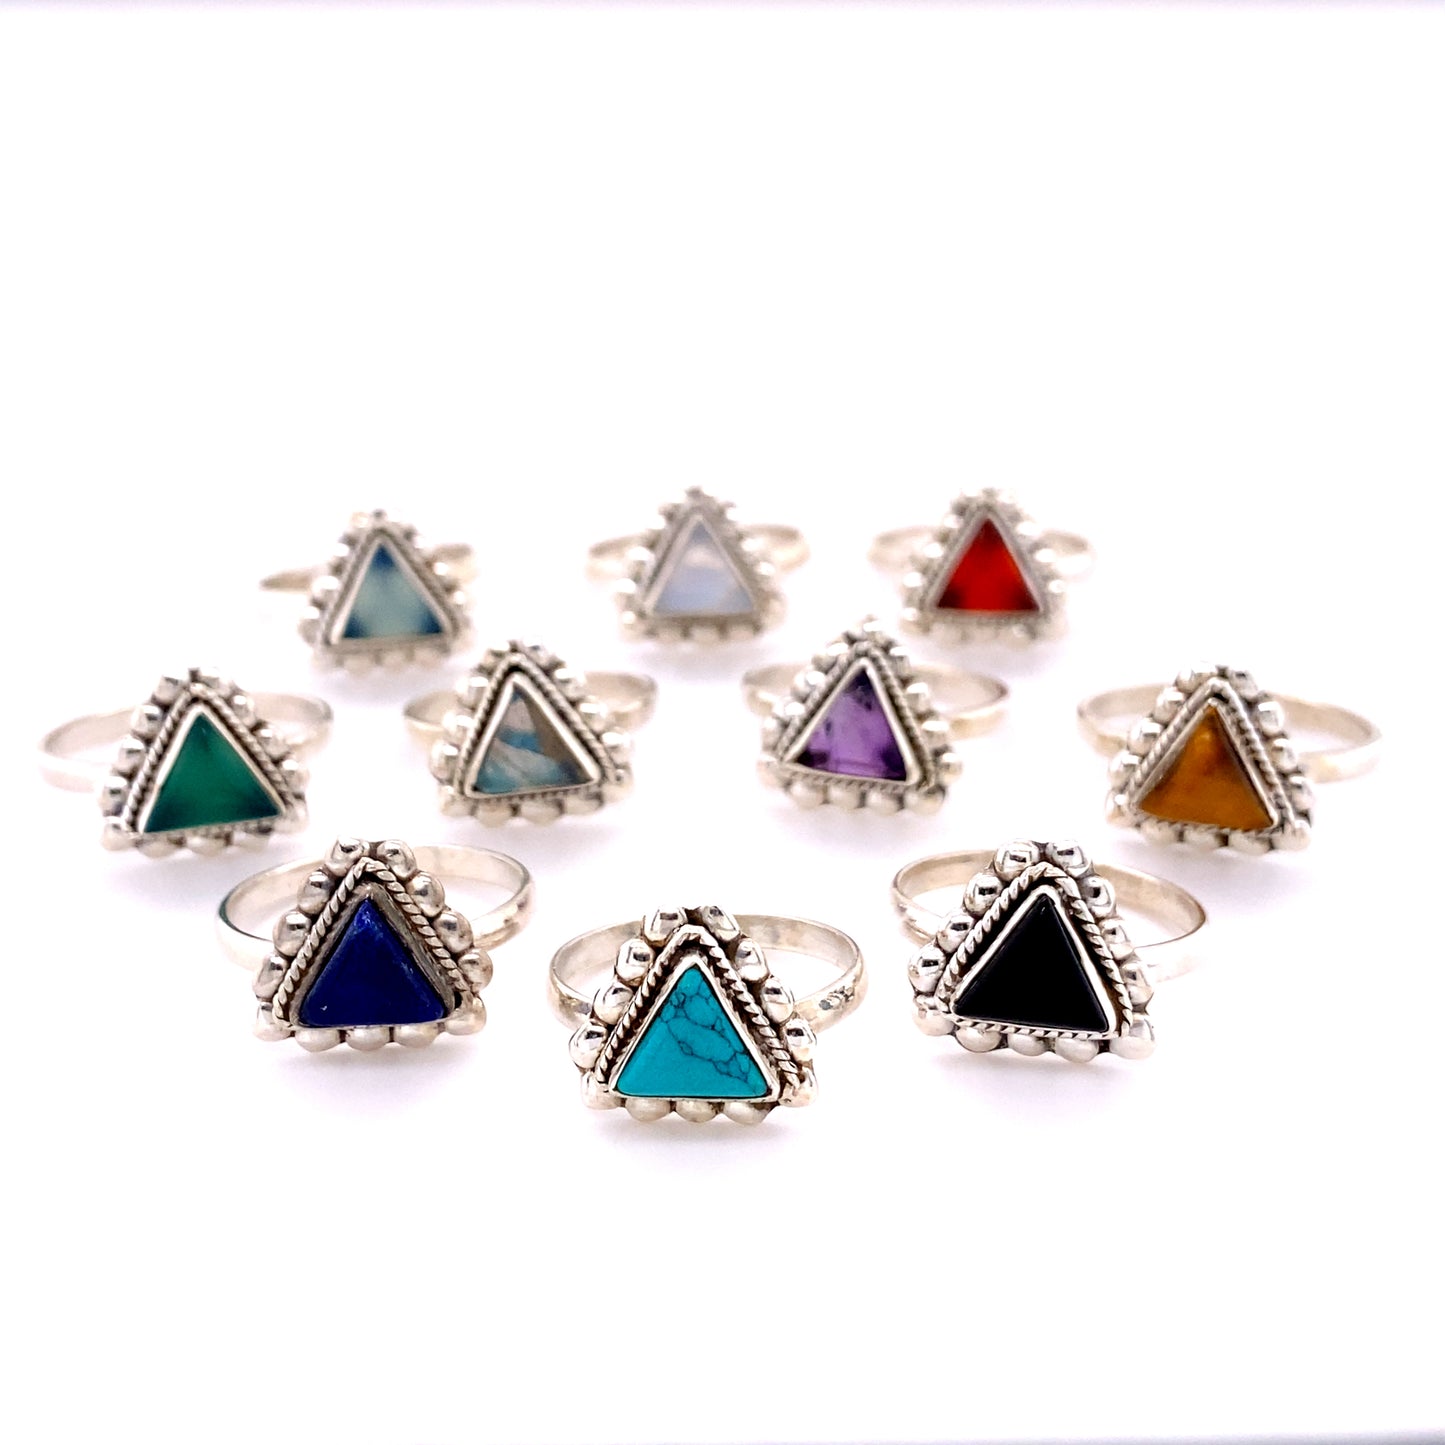 A set of Triangle Gemstone Rings with Beads, crafted in sterling silver, adorned with different colored stones.